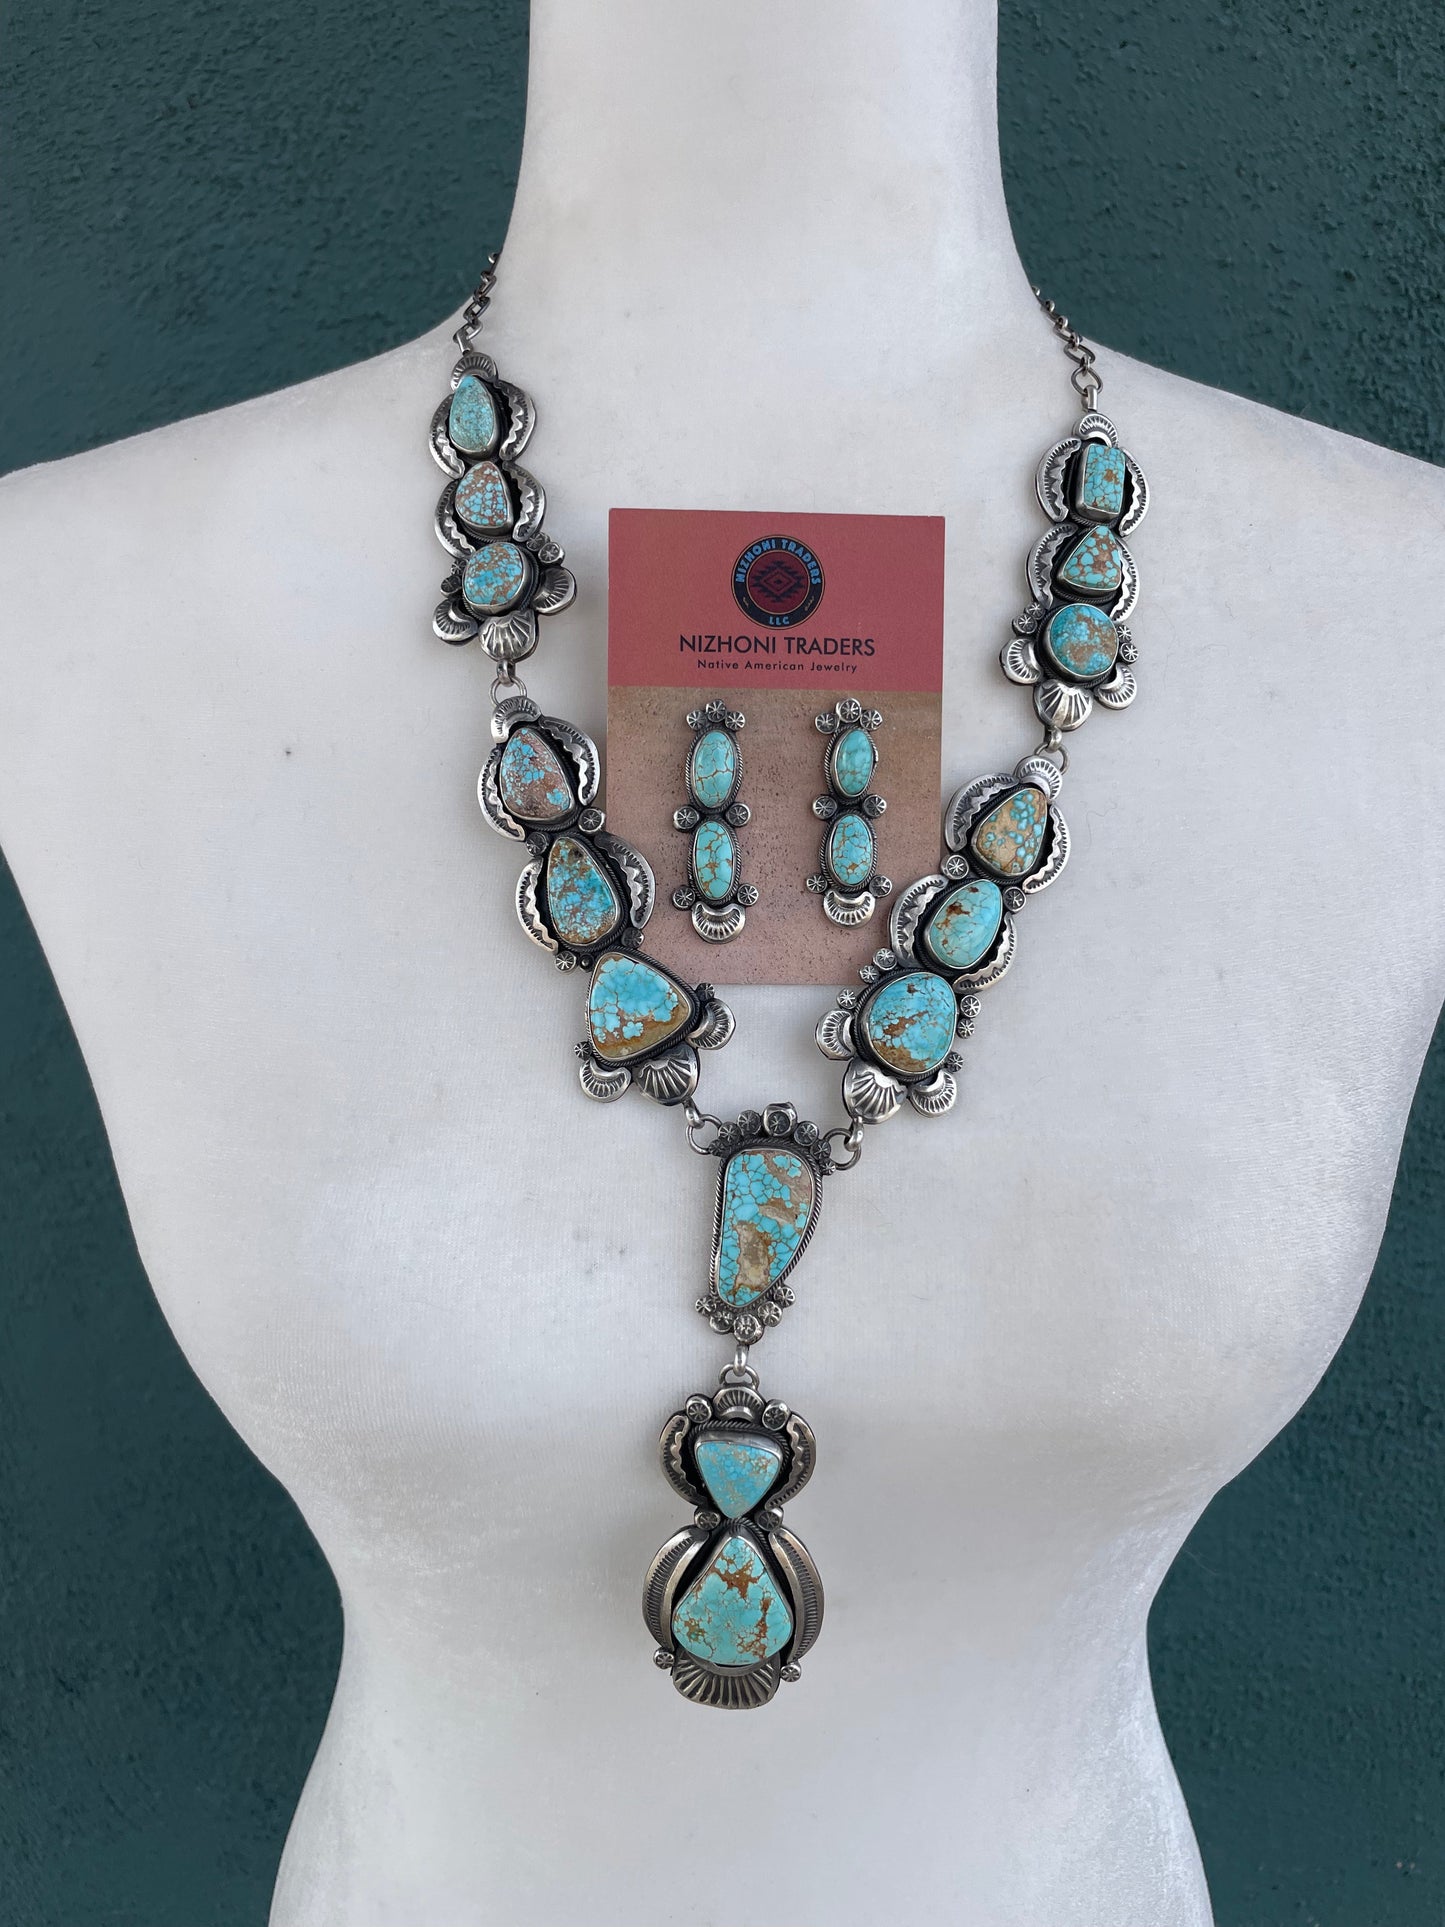 Navajo Sterling Silver & Number 8 Turquoise Necklace Earring Set Signed